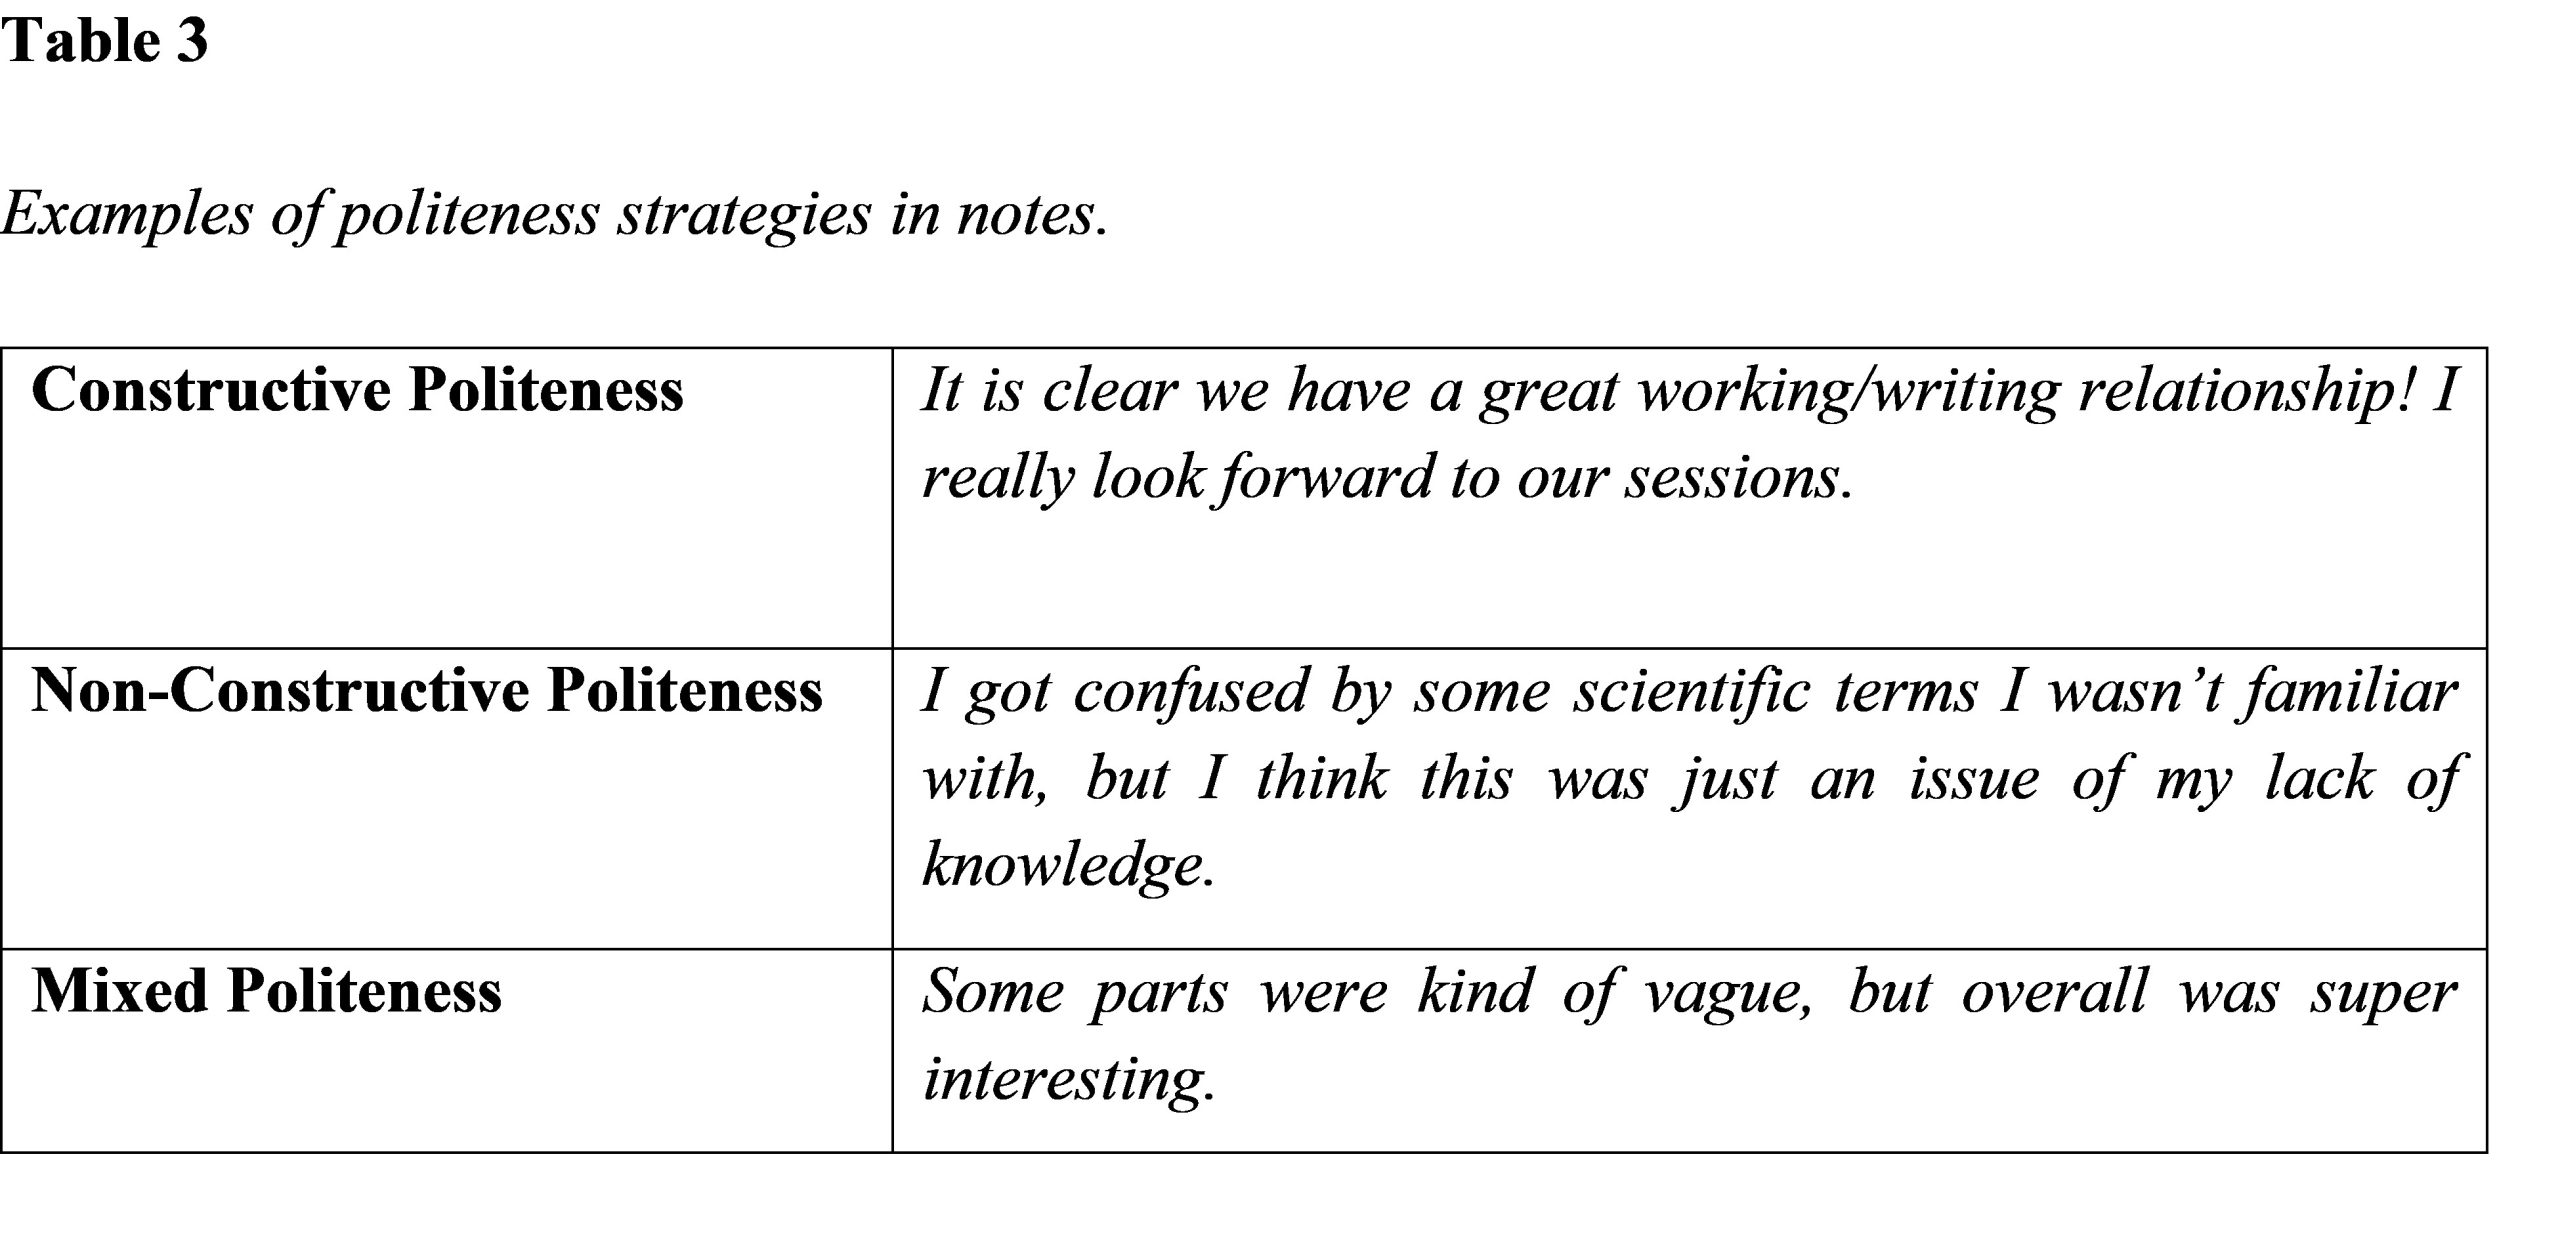 Table showing examples of politeness strategies including constructive, non-constructive and mixed politeness.